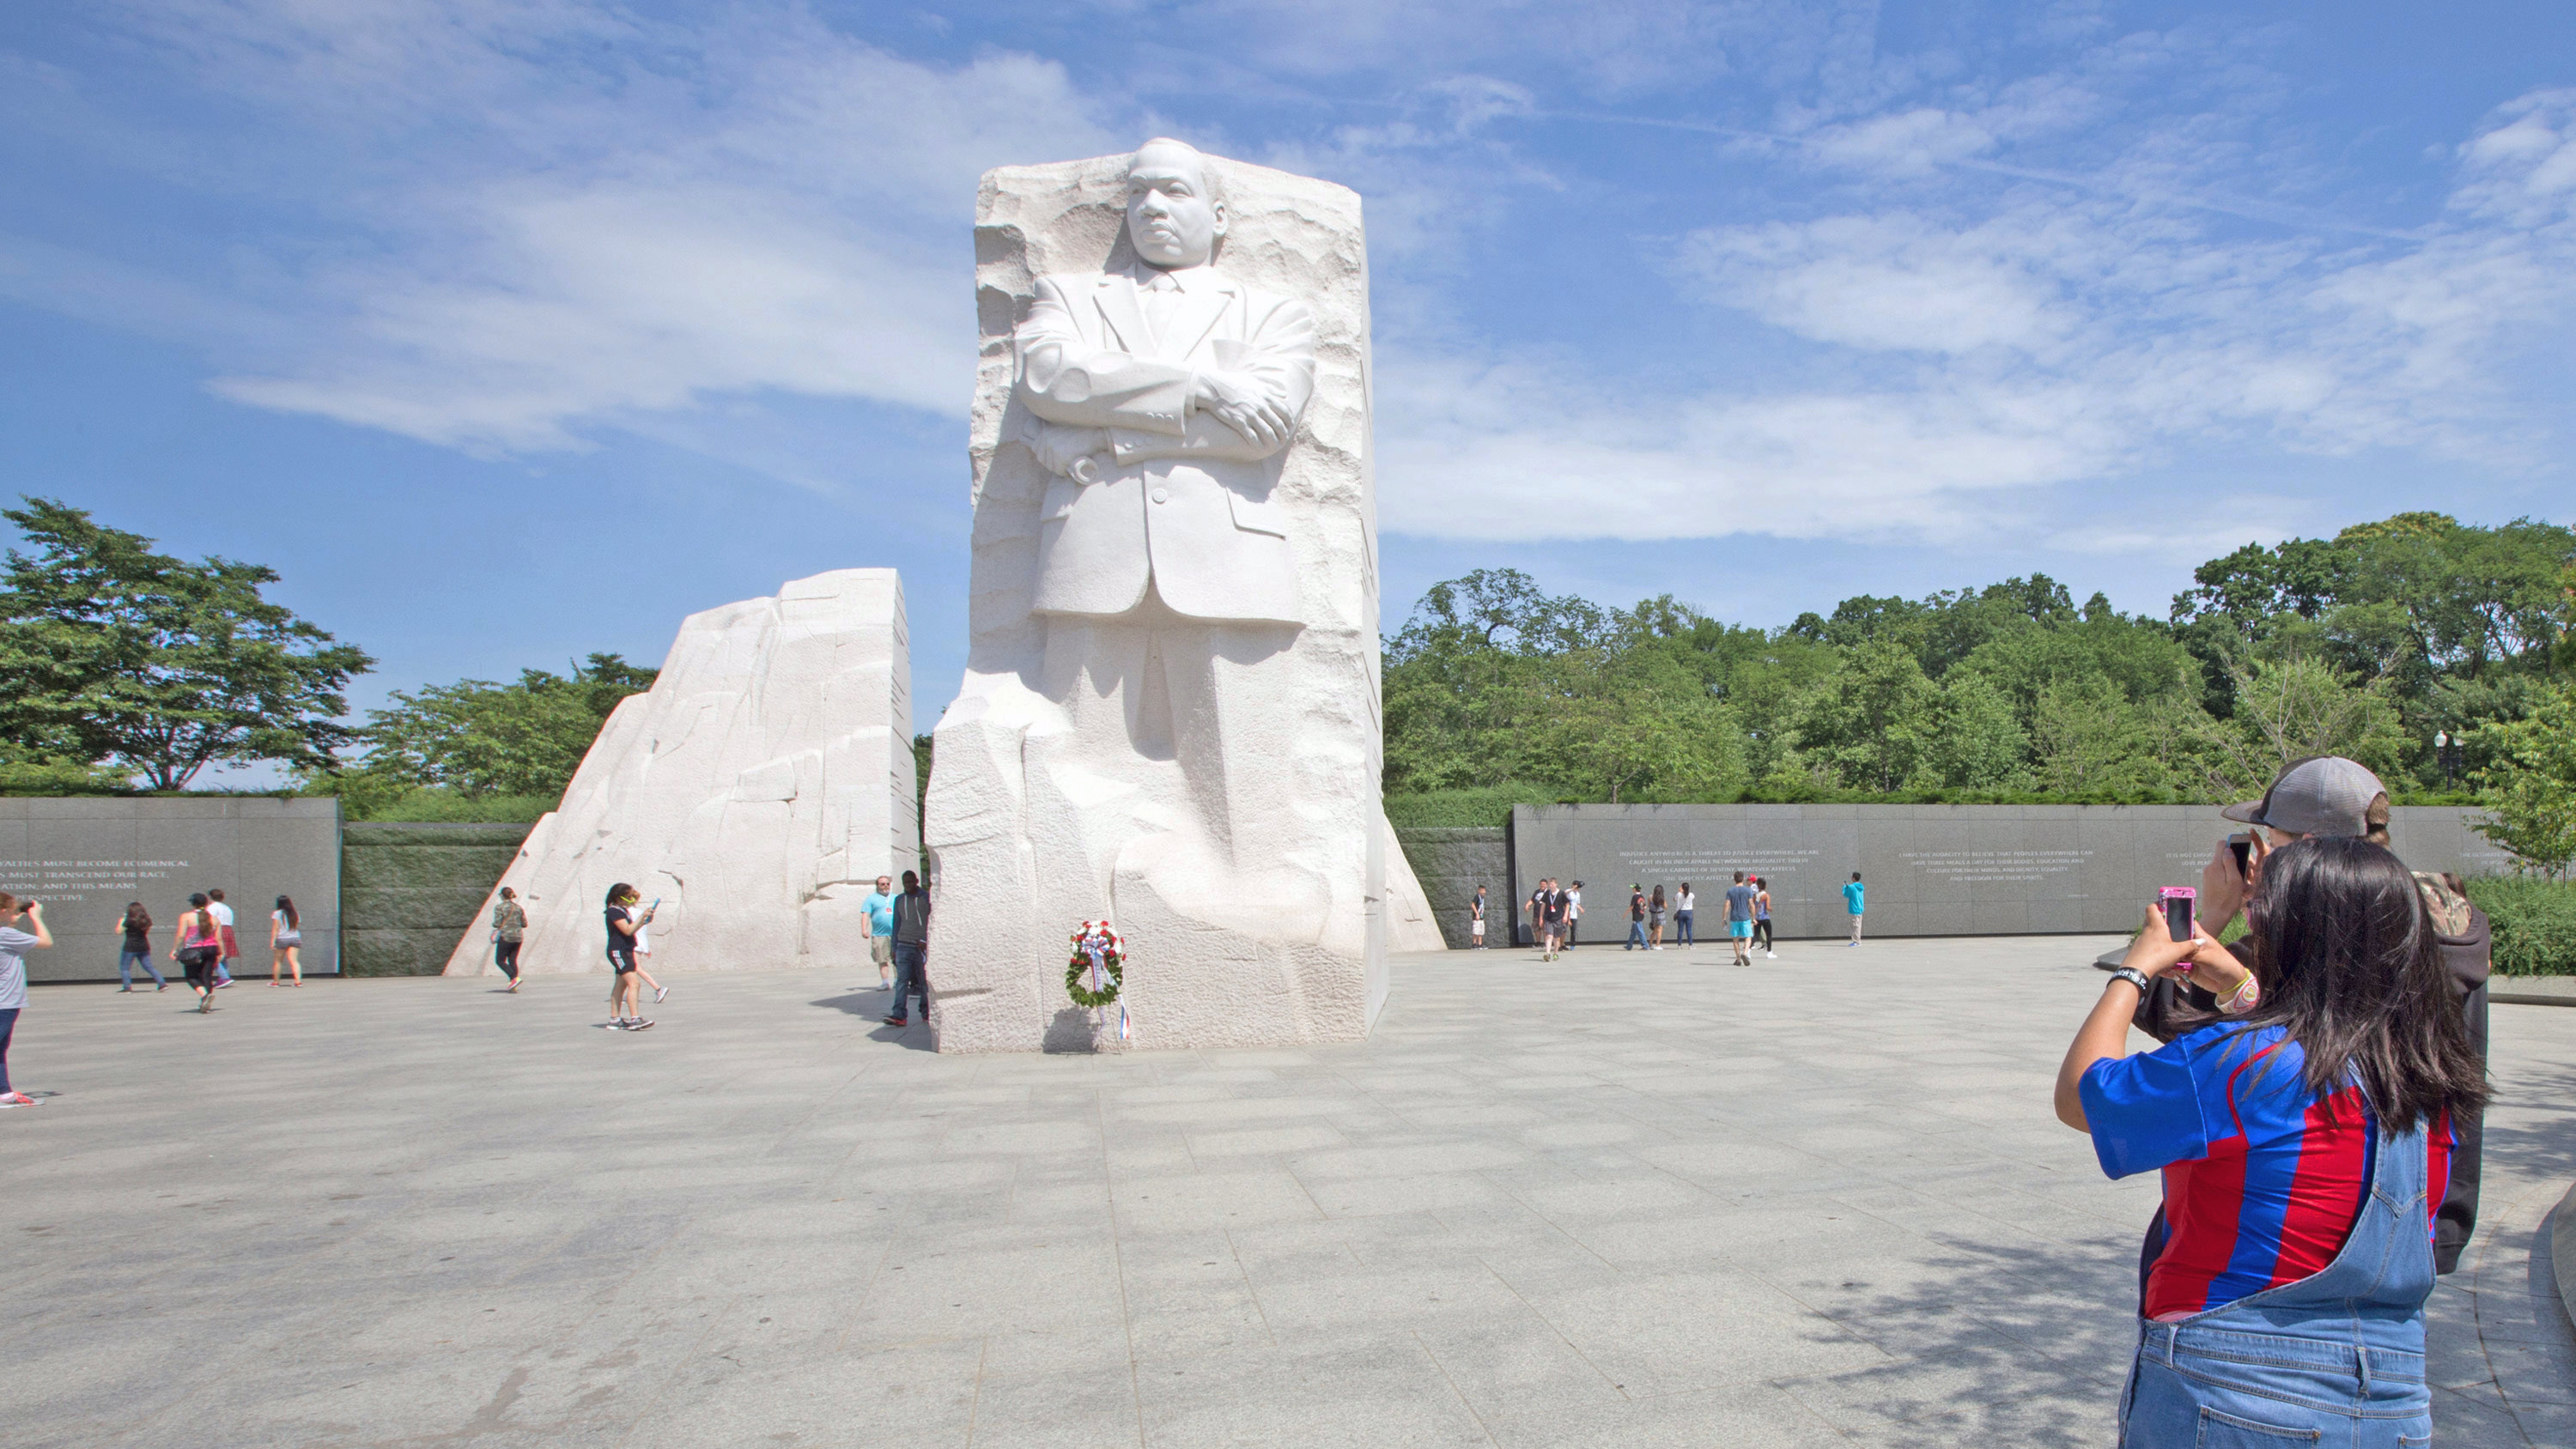 Interesting facts about the Martin Luther King, Jr. Memorial - WorldStrides3000 x 1688